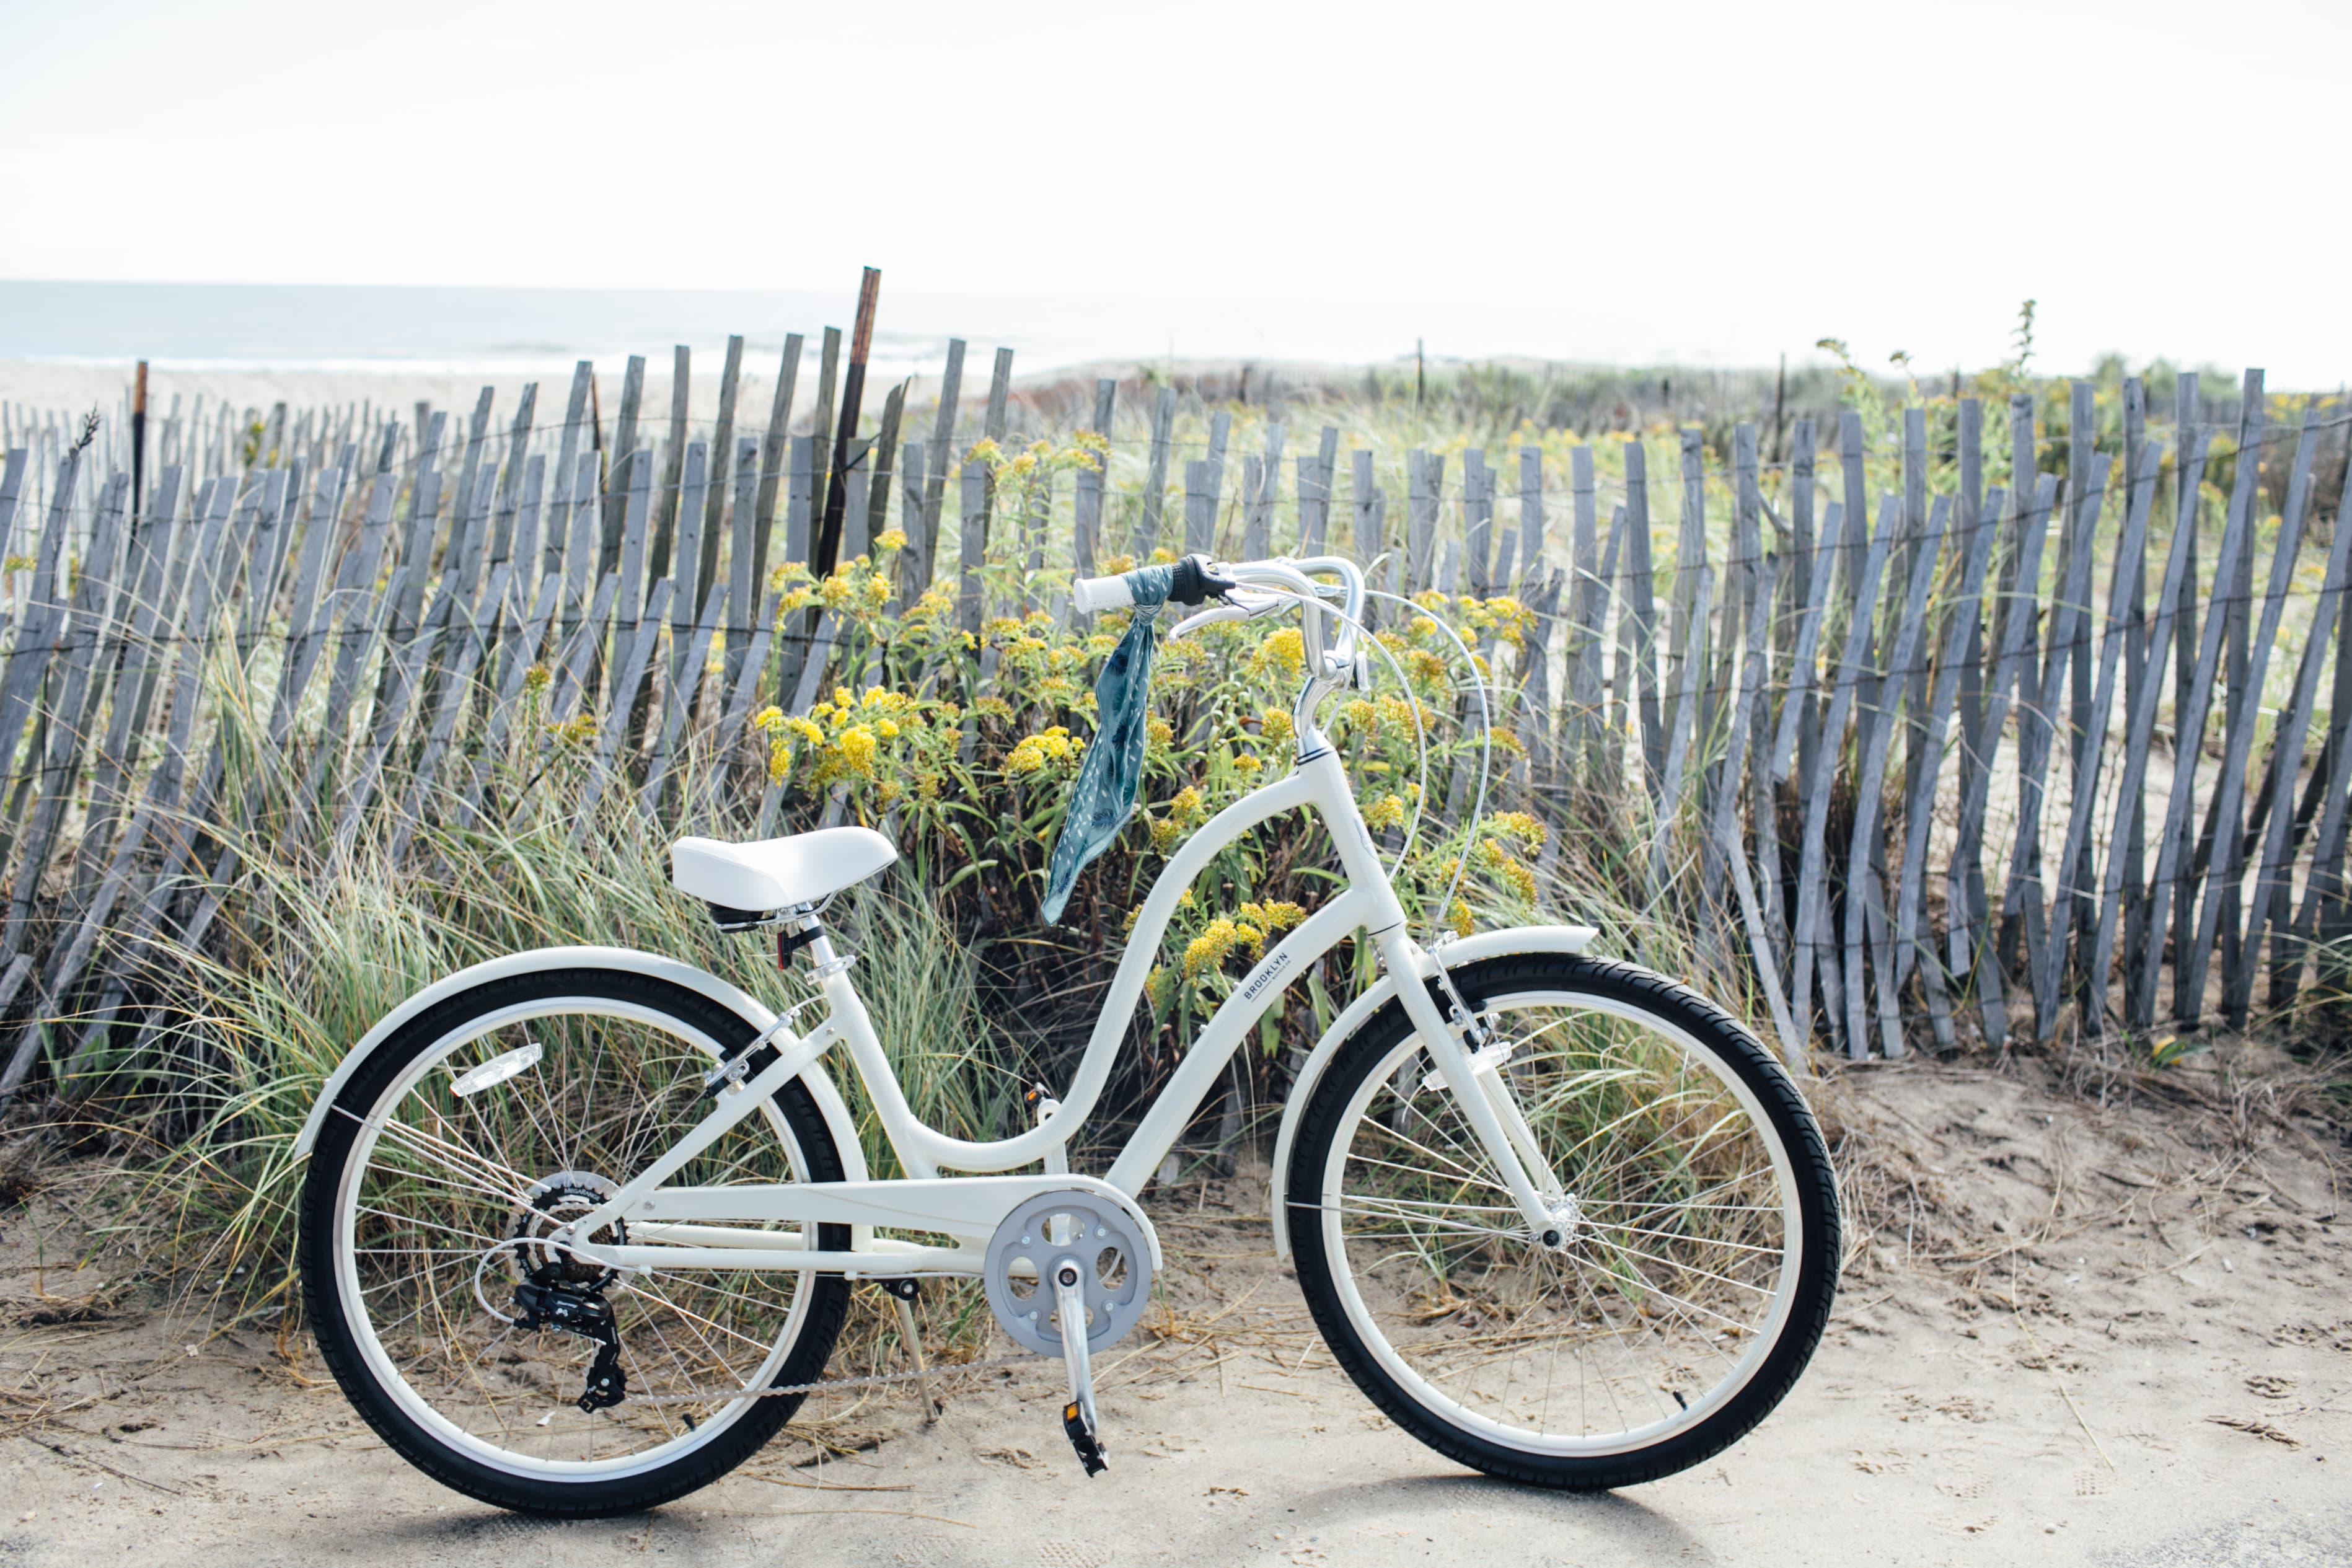 Top Five Things to Consider When Buying a Cruiser Bike